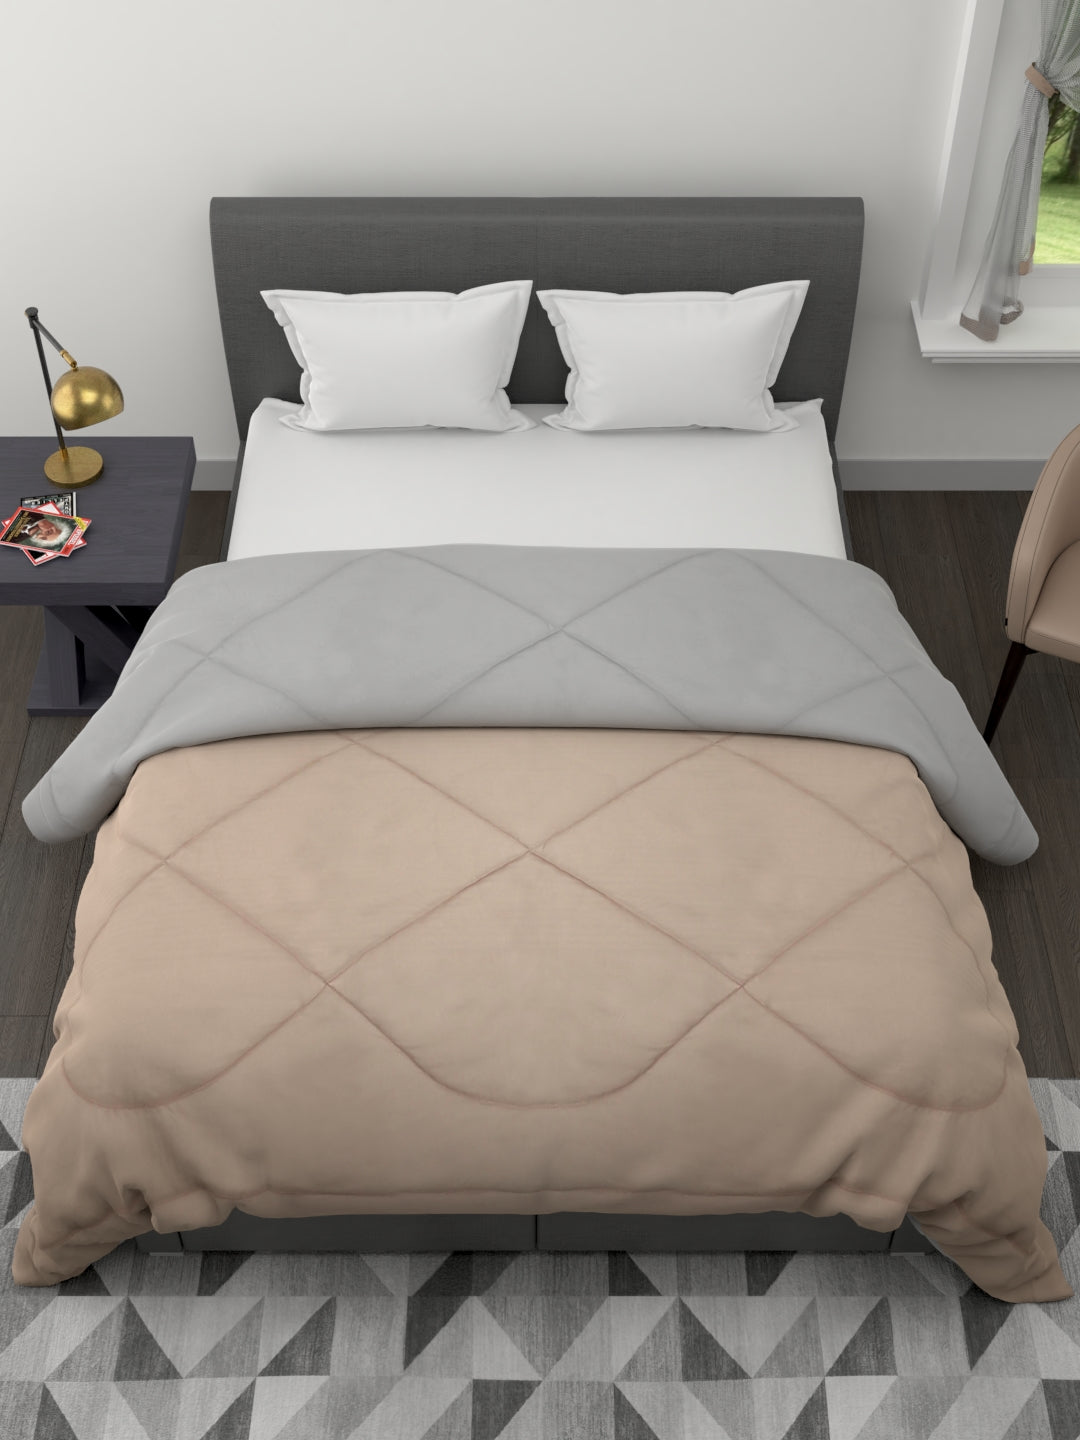 Reversible Double Bed King Size Comforter; 90x100 Inches; Taupe & Grey